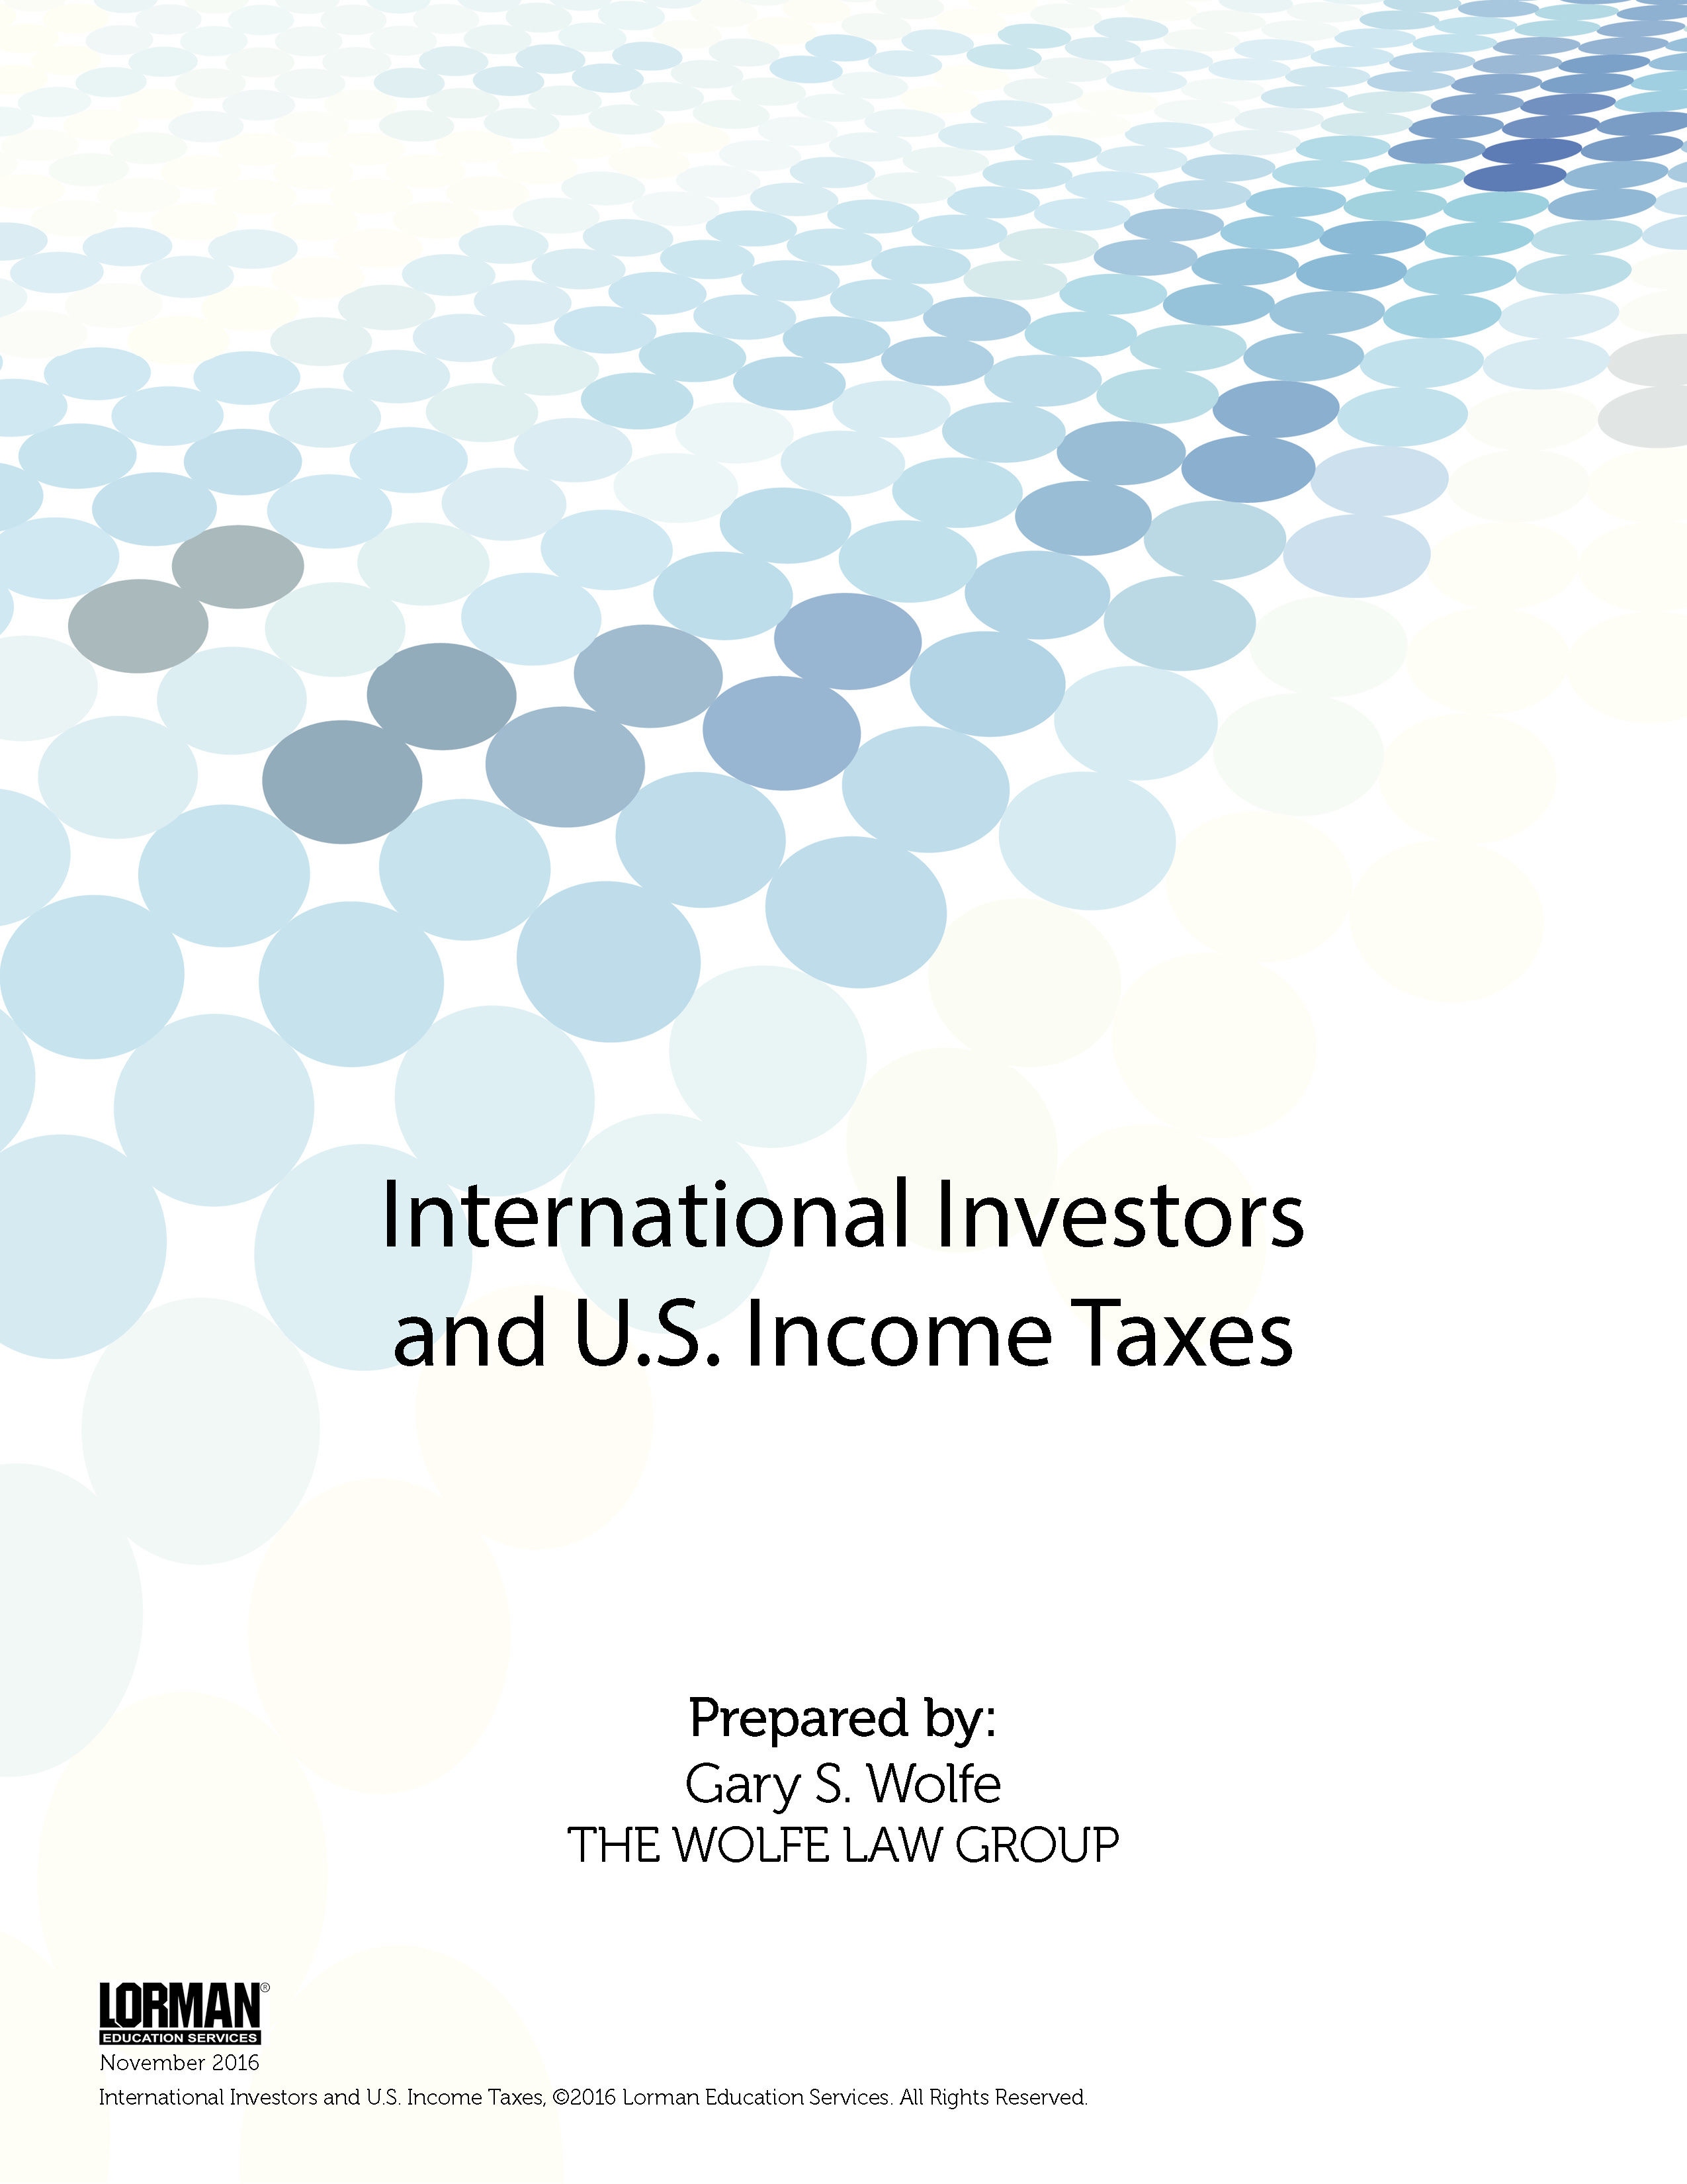 International Investors and U.S. Income Taxes